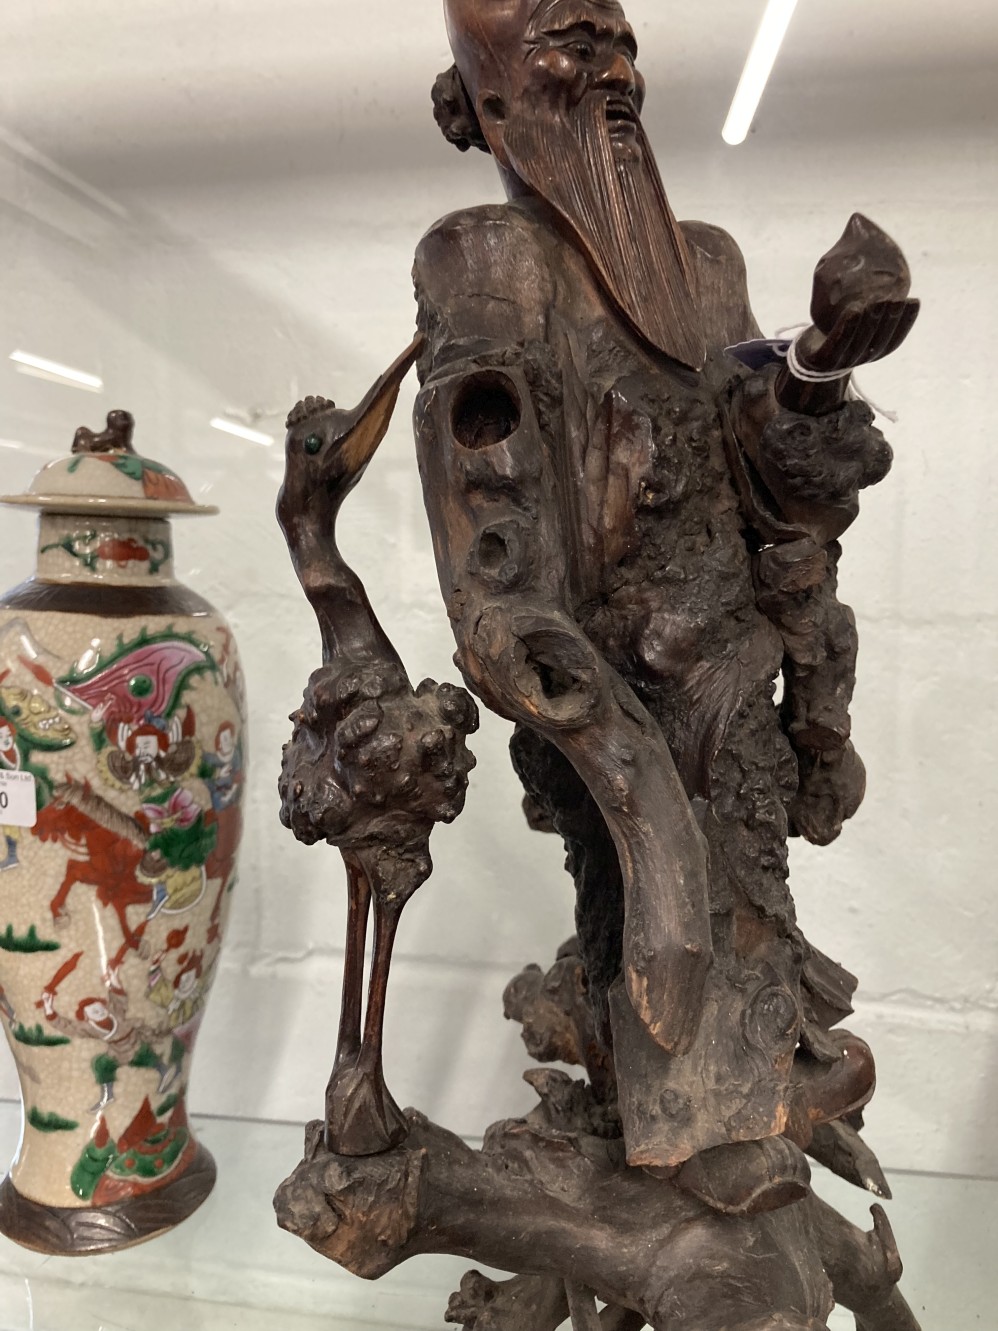 19th cent. Qing Dynasty carved rootwood figure of Shoulao shown standing holding a staff and a peach - Image 4 of 5